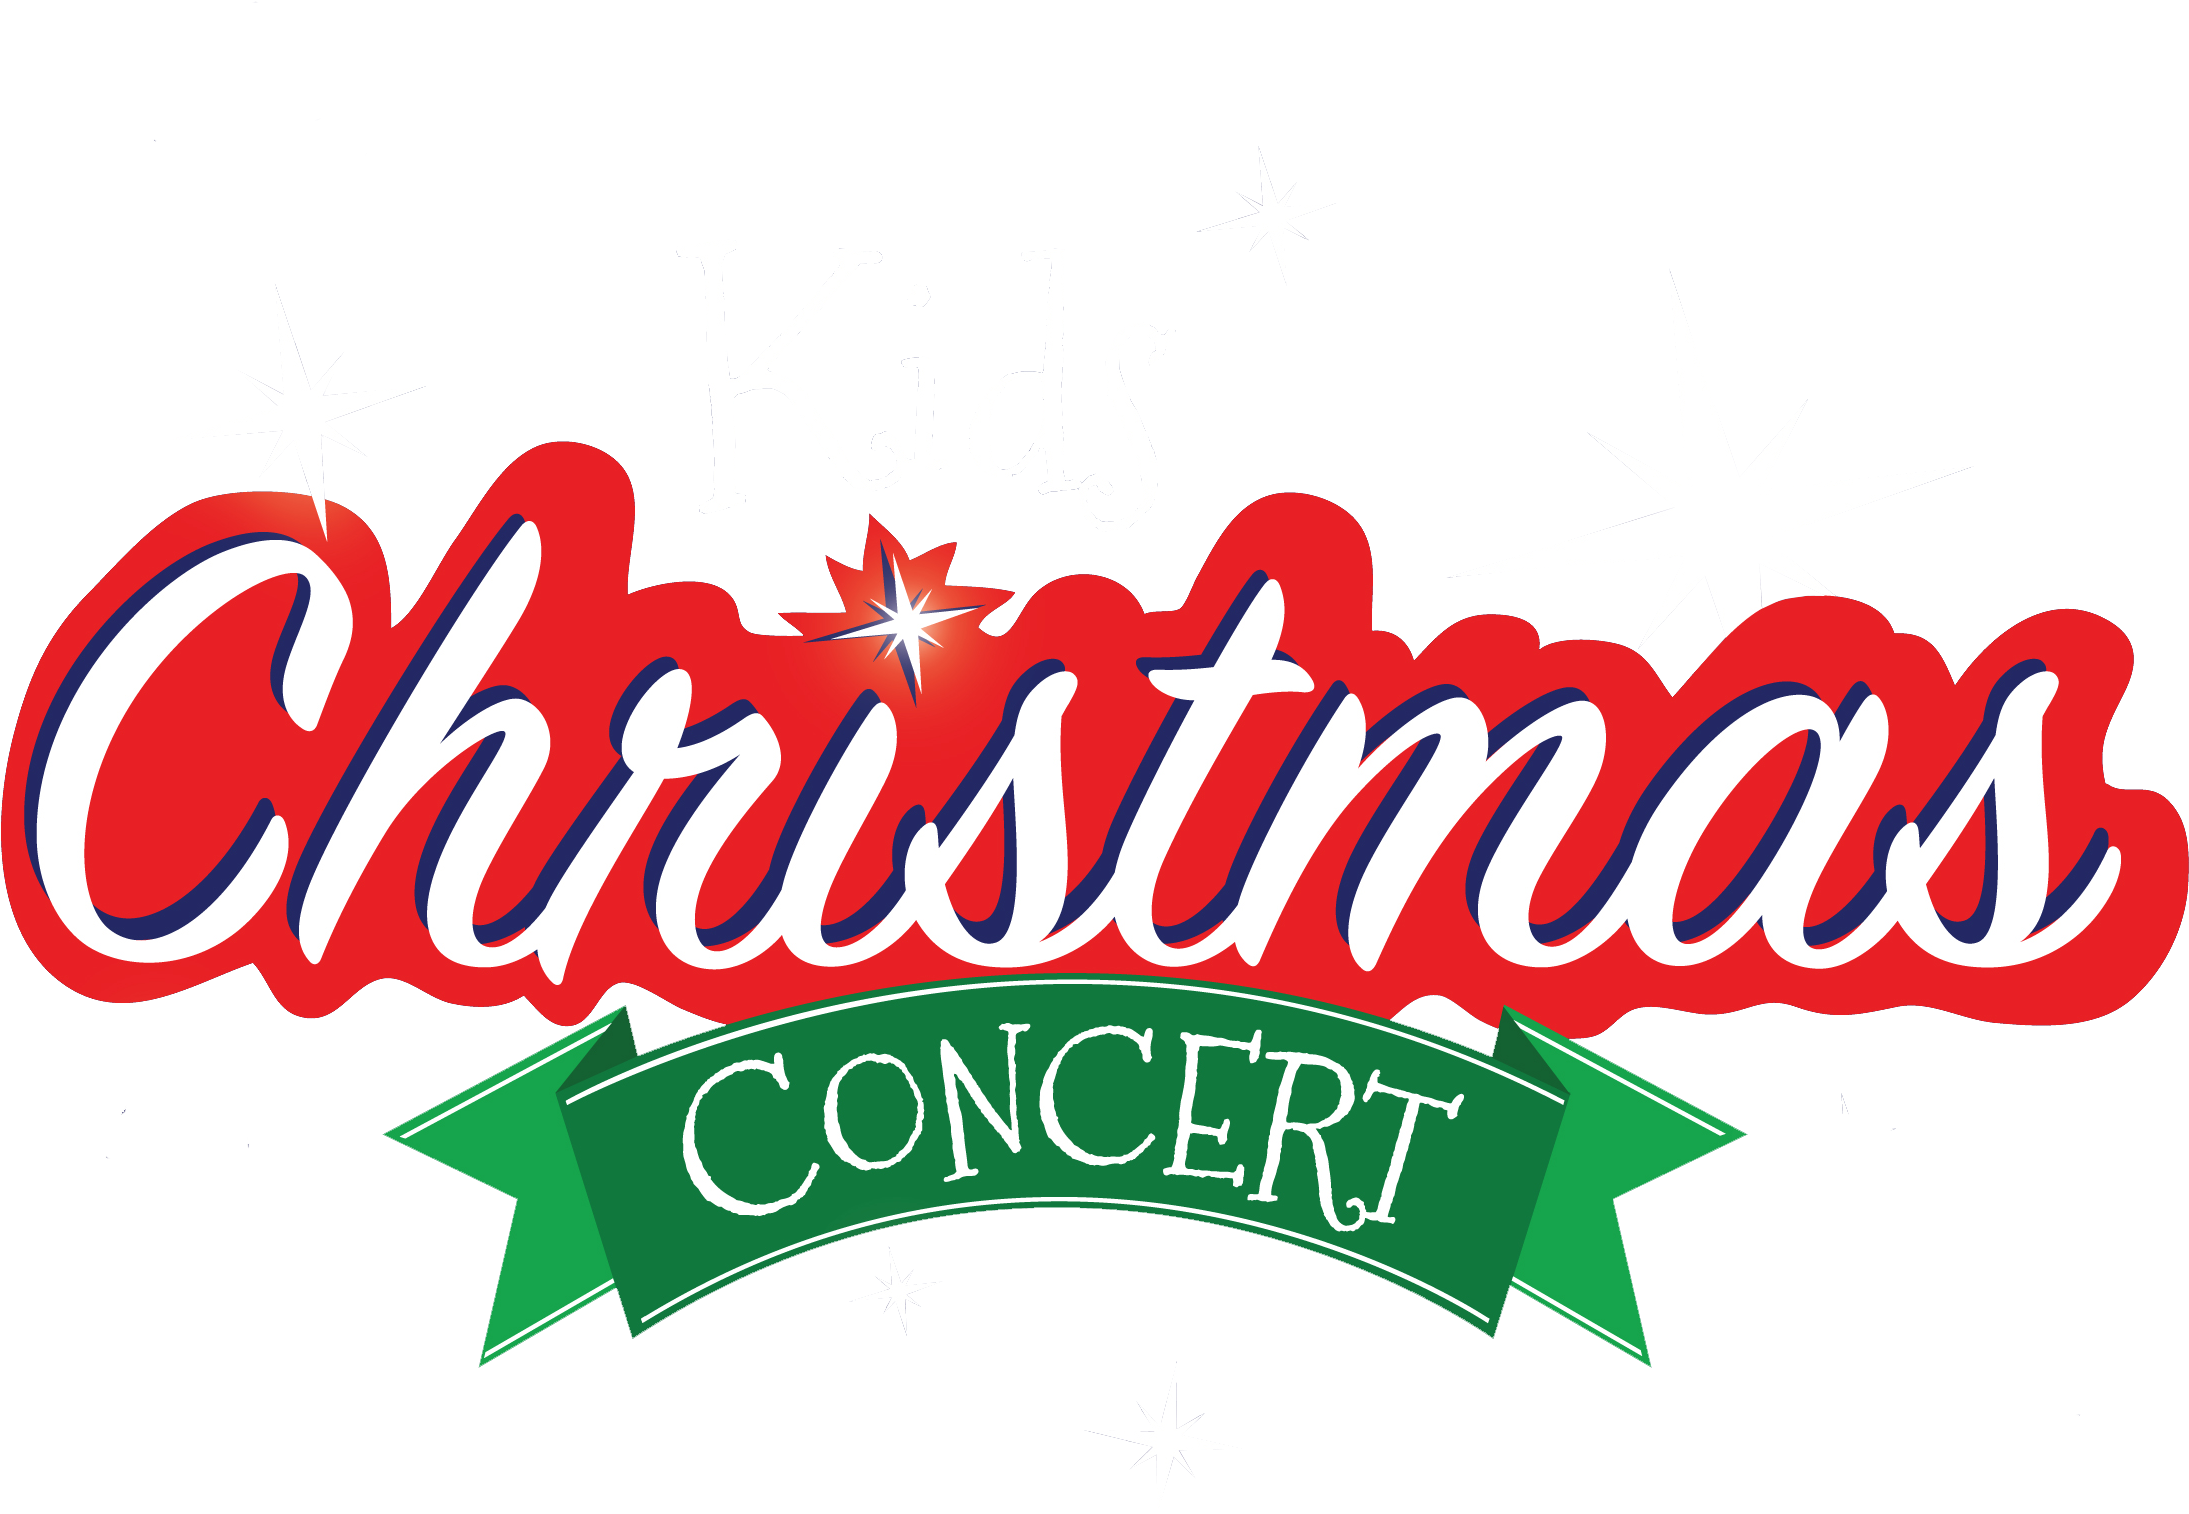 Concert Songs - Childrens Christmas Concert (2480x1669)